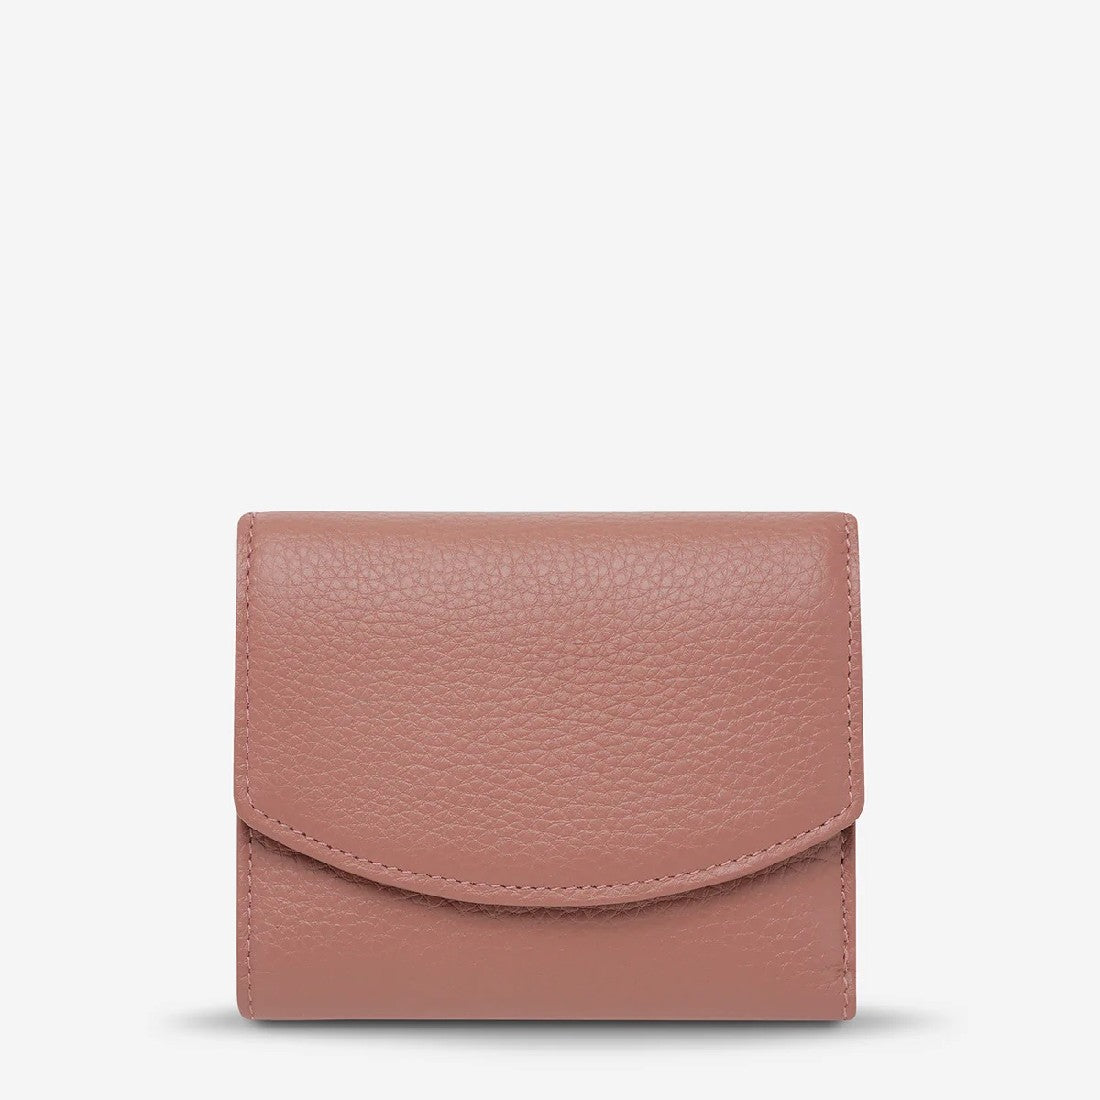 Status Anxiety Lucky Sometimes Wallet [COLOUR:Dusty rose]